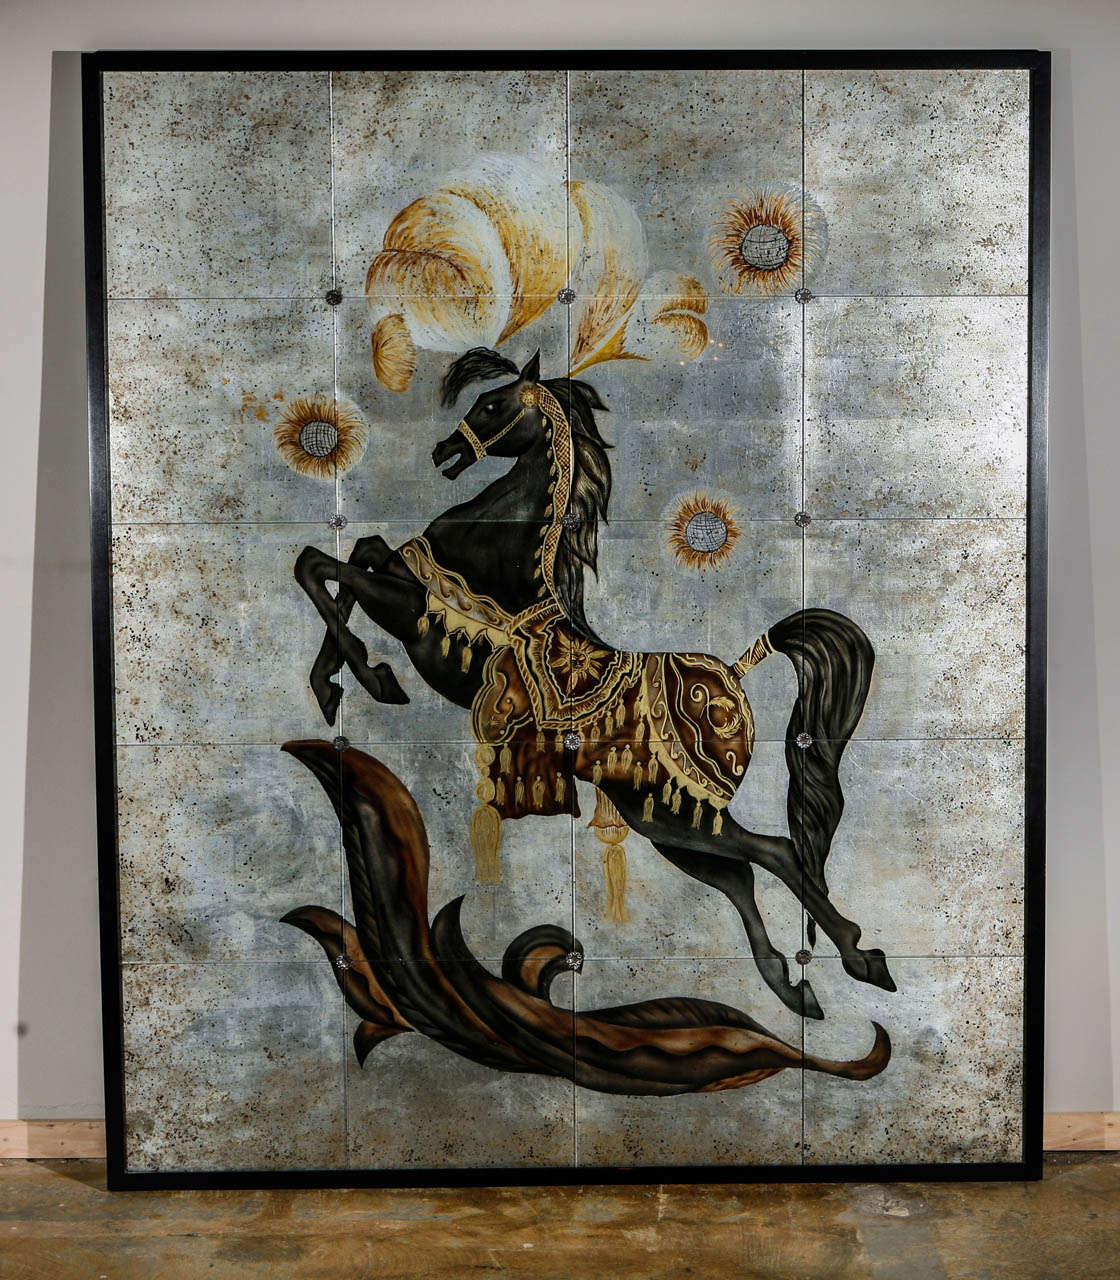 Very large framed verre eglomise of a stallion, 1930s-40s style, hand painted with white gold.